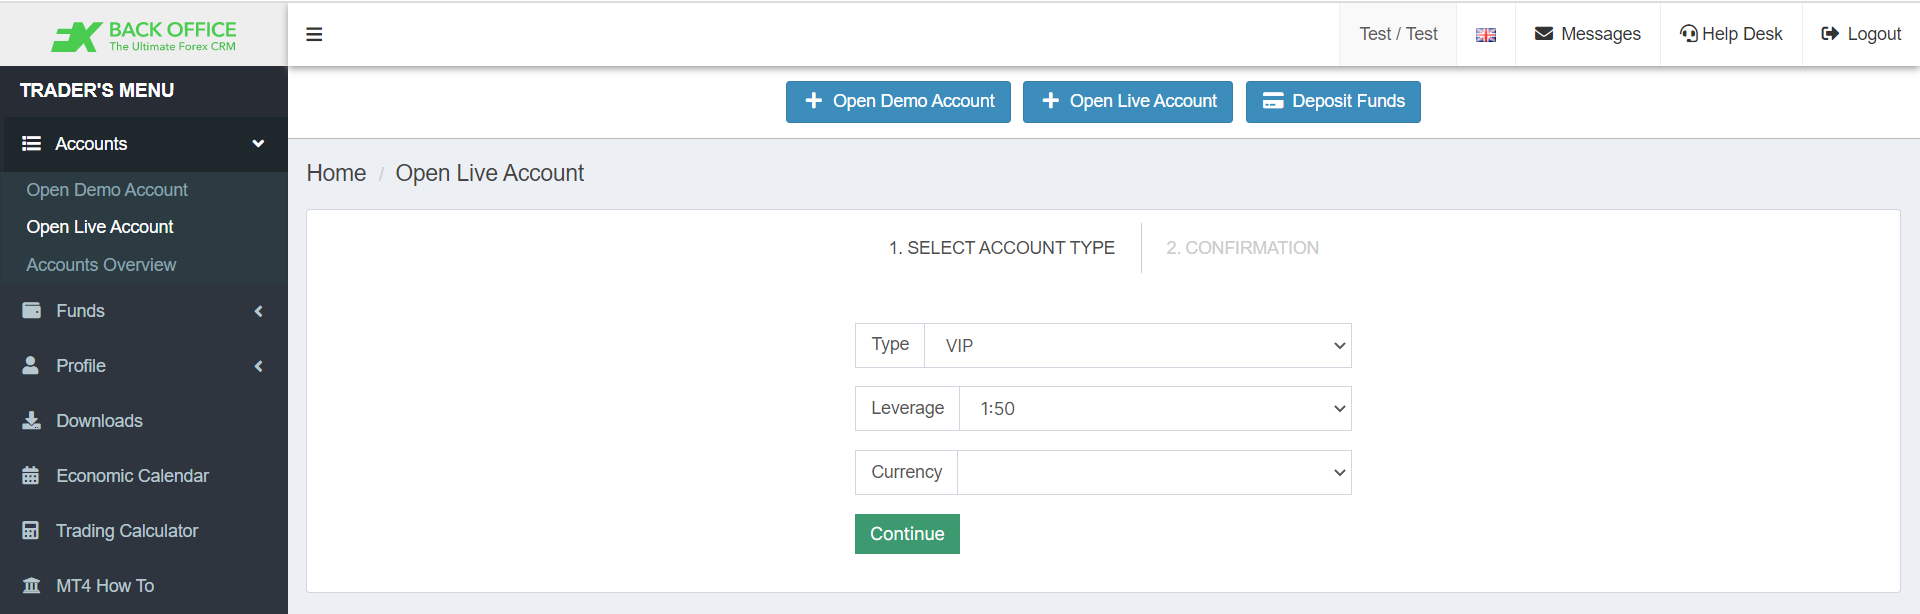 The Accounts section is where one can request the opening of new live and demo accounts